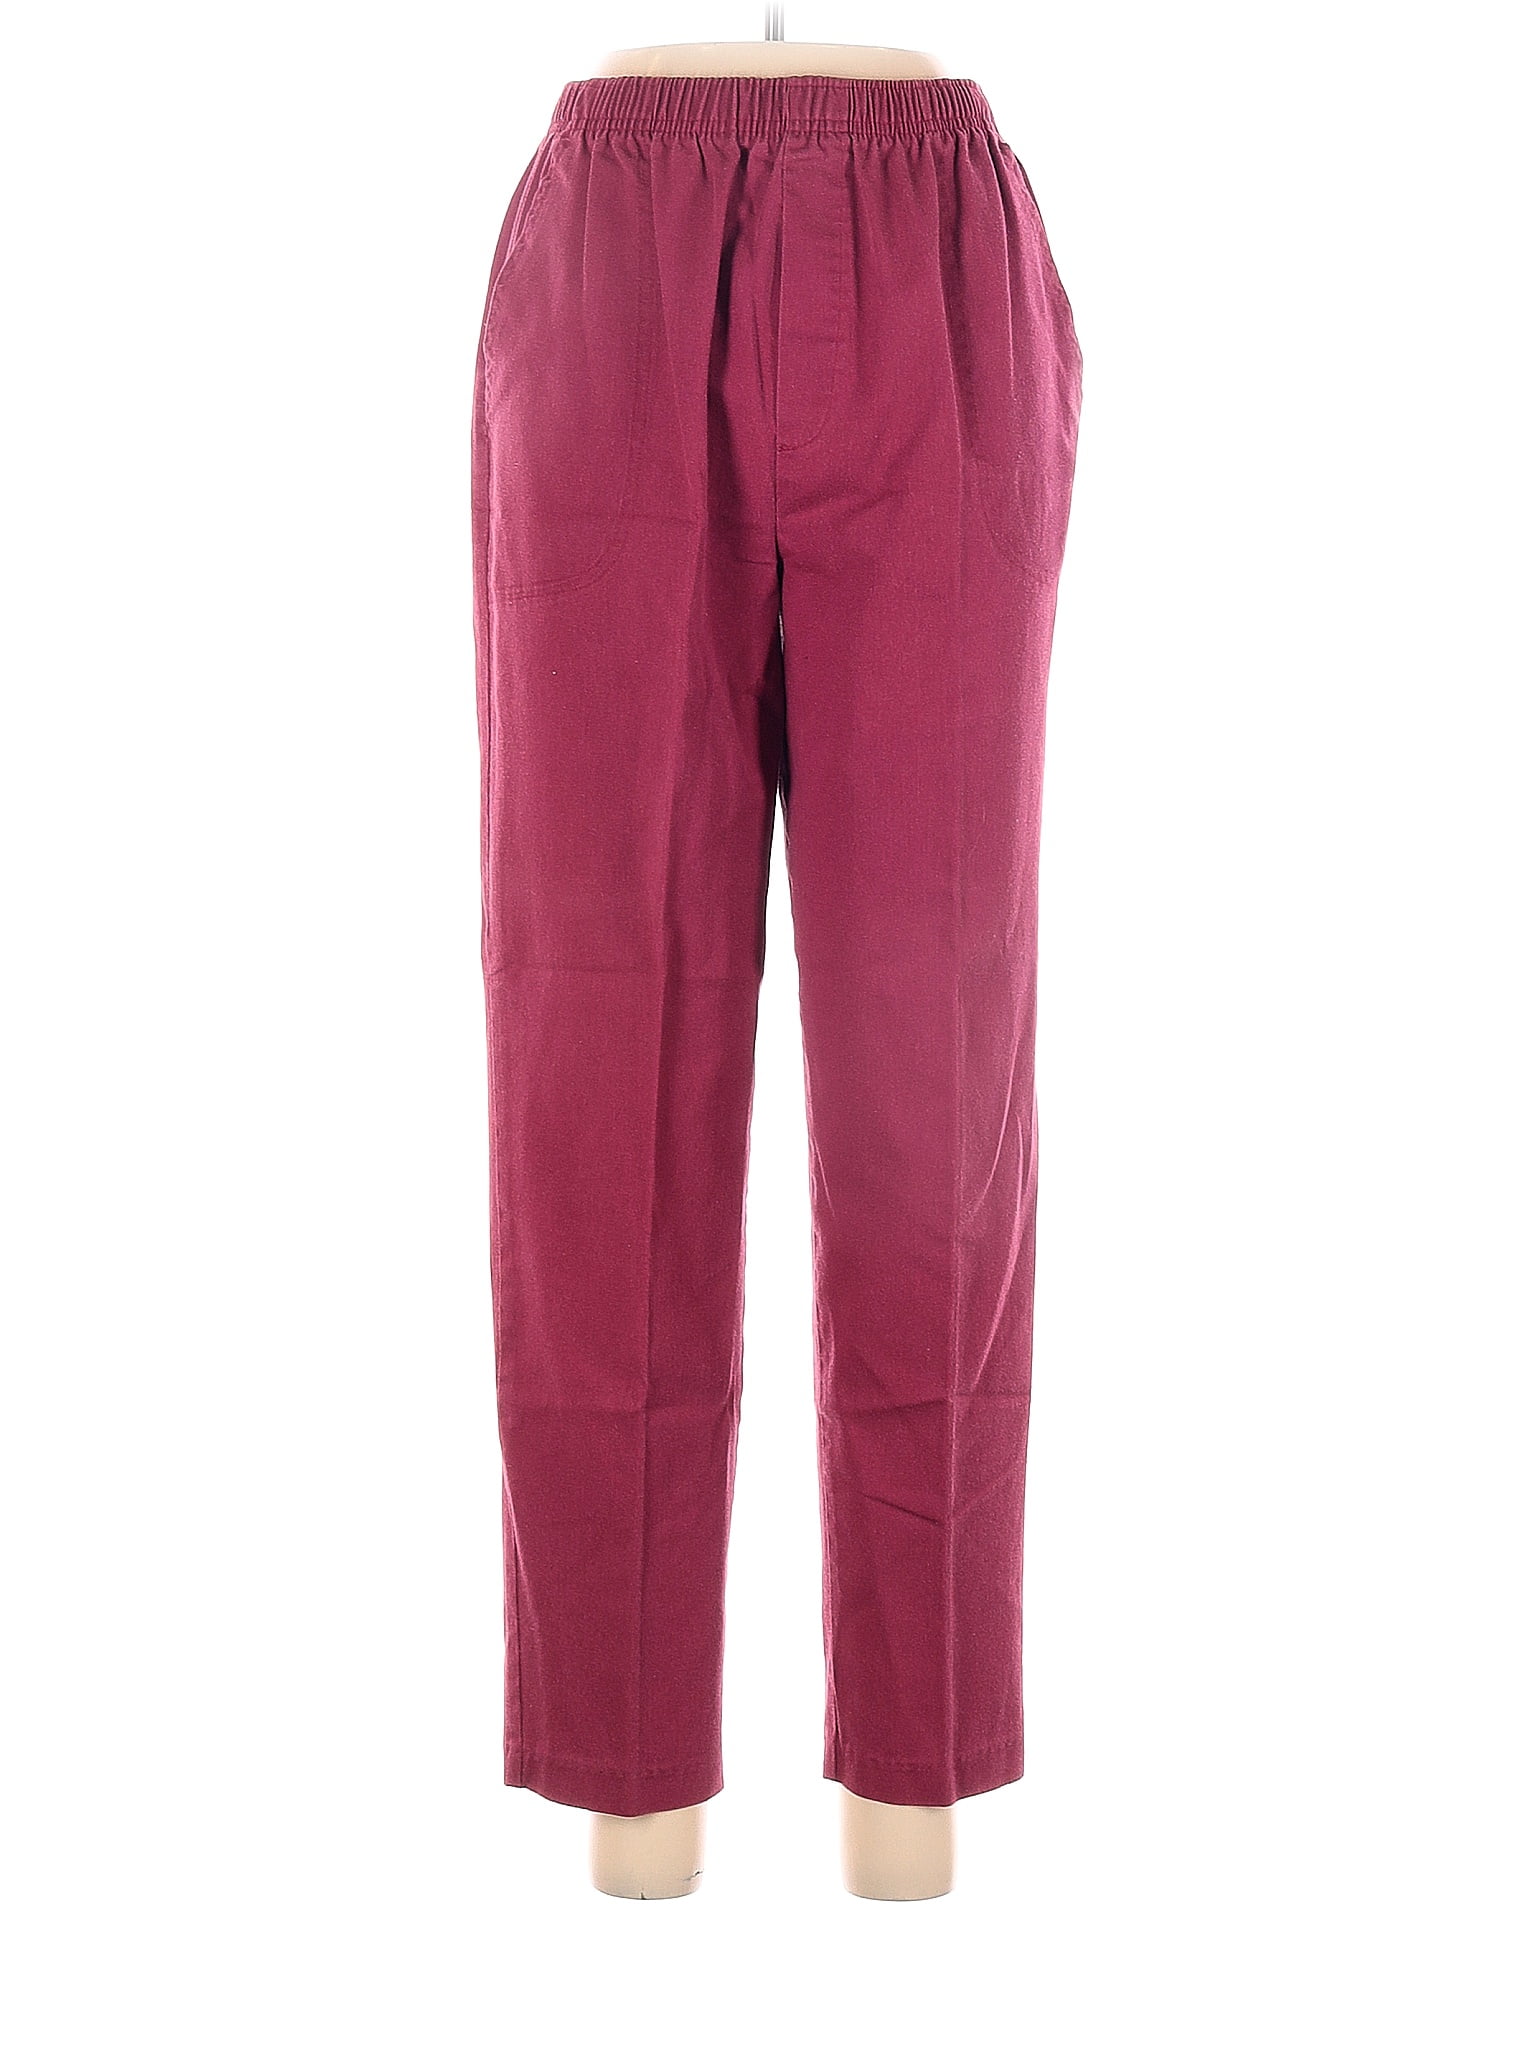 Cabin Creek Solid Pink Burgundy Casual Pants Size 10 - 53% off | thredUP